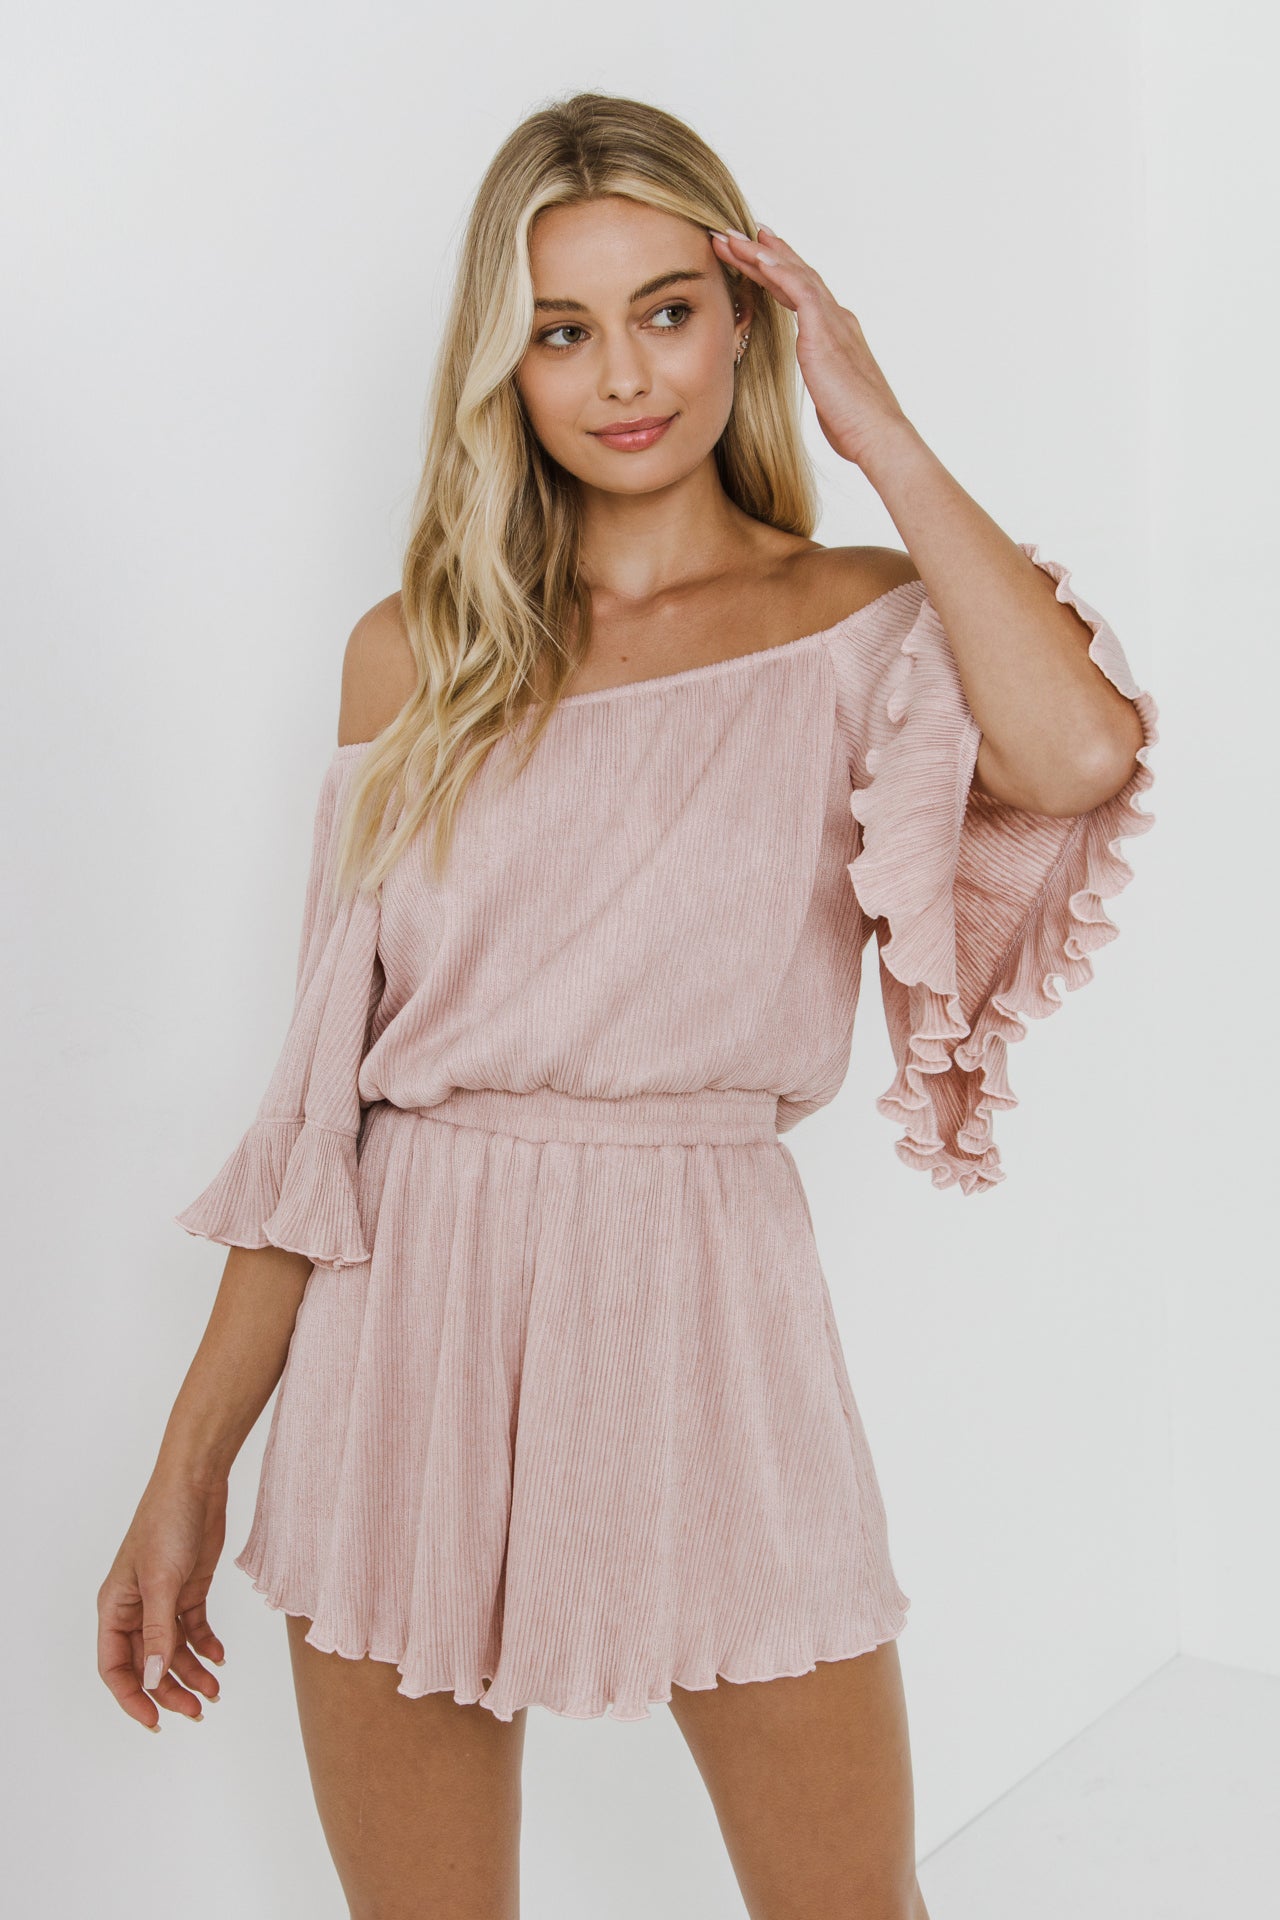 FREE THE ROSES - Texture Knit Romper - ROMPERS available at Objectrare